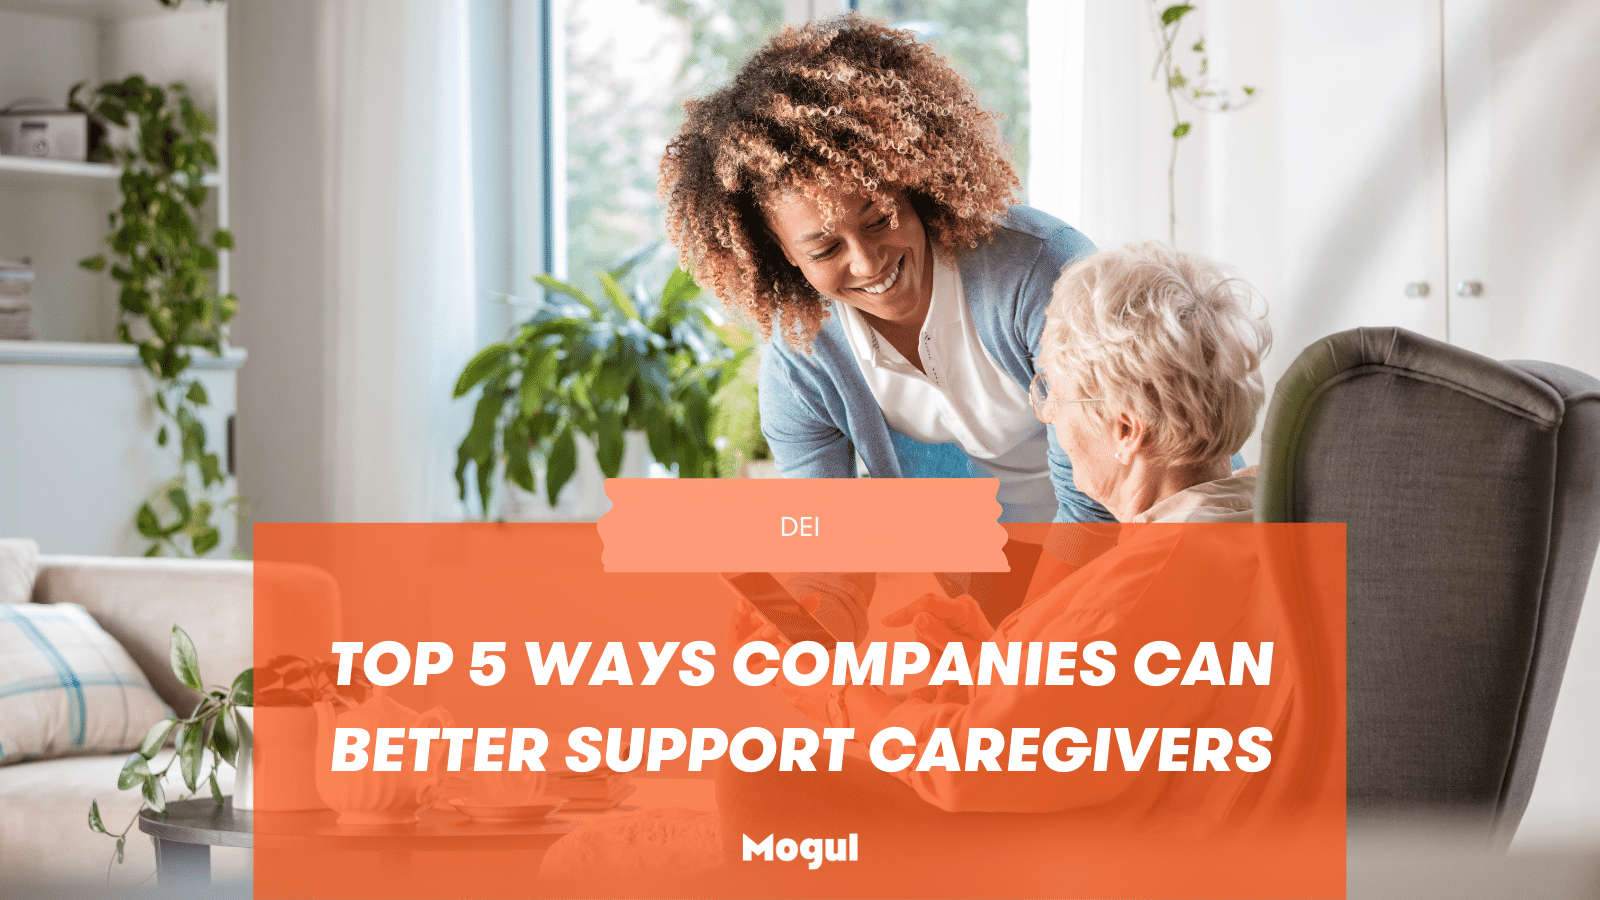 Top 5 Ways Companies Can Better Support Caregivers